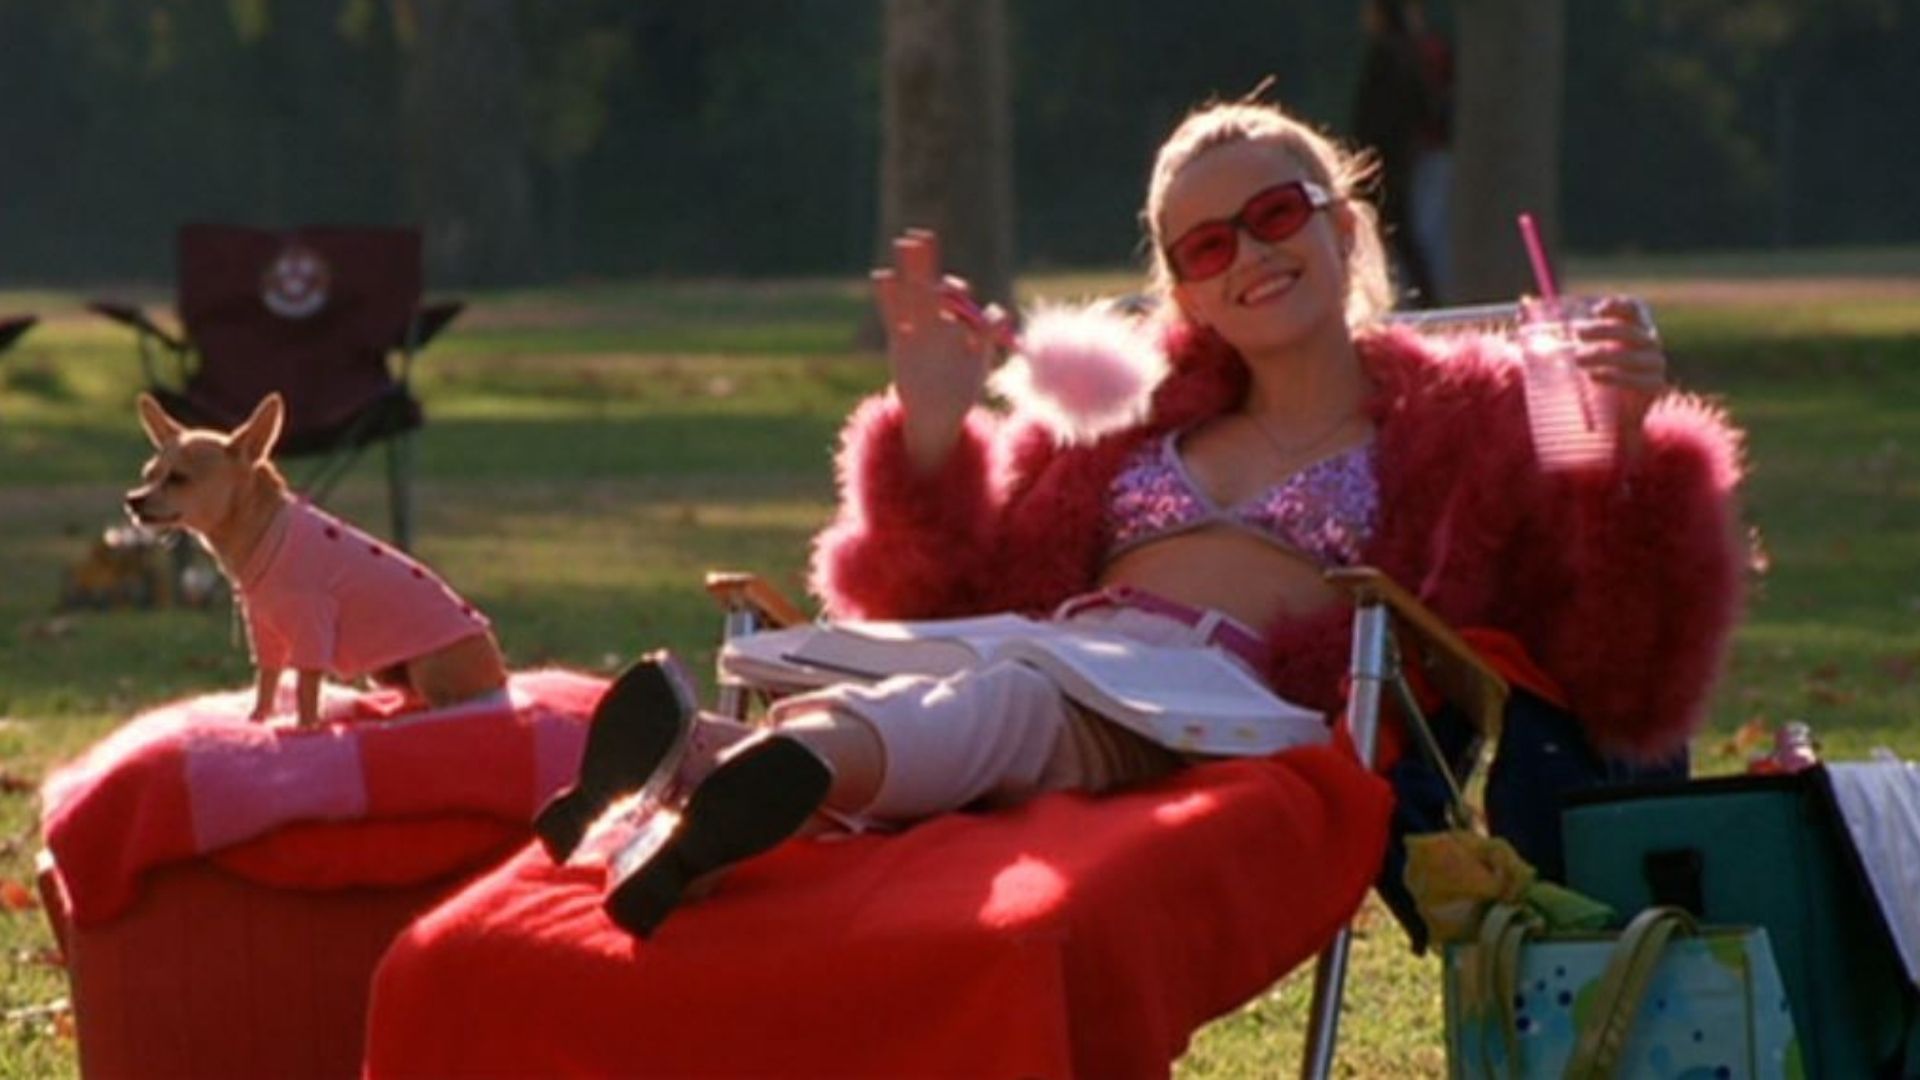 Movies to watch on International Women's Day: Legally Blonde